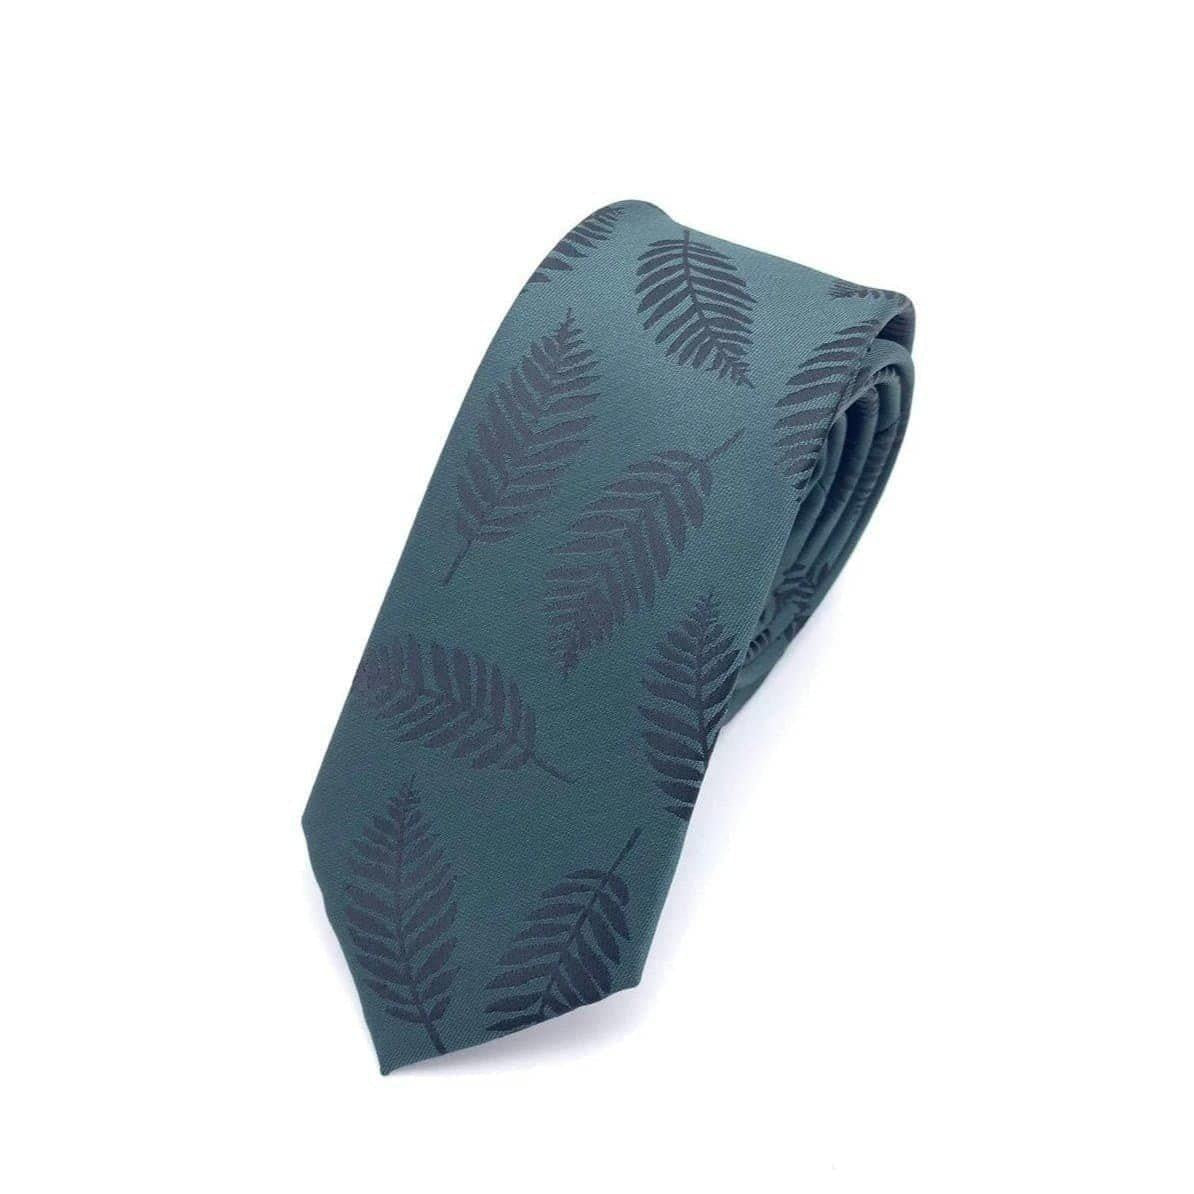 Floral Green Skinny Tie 2.36LAIF-Neckties-Floral Green Skinny Tie for weddings and events, great for prom and anniversary gifts. Mens floral ties near me us ties tie shops cool ties-Mytieshop. Skinny ties for weddings anniversaries. Father of bride. Groomsmen. Cool skinny neckties for men. Neckwear for prom, missions and fancy events. Gift ideas for men. Anniversaries ideas. Wedding aesthetics. Flower ties. Dry flower ties.